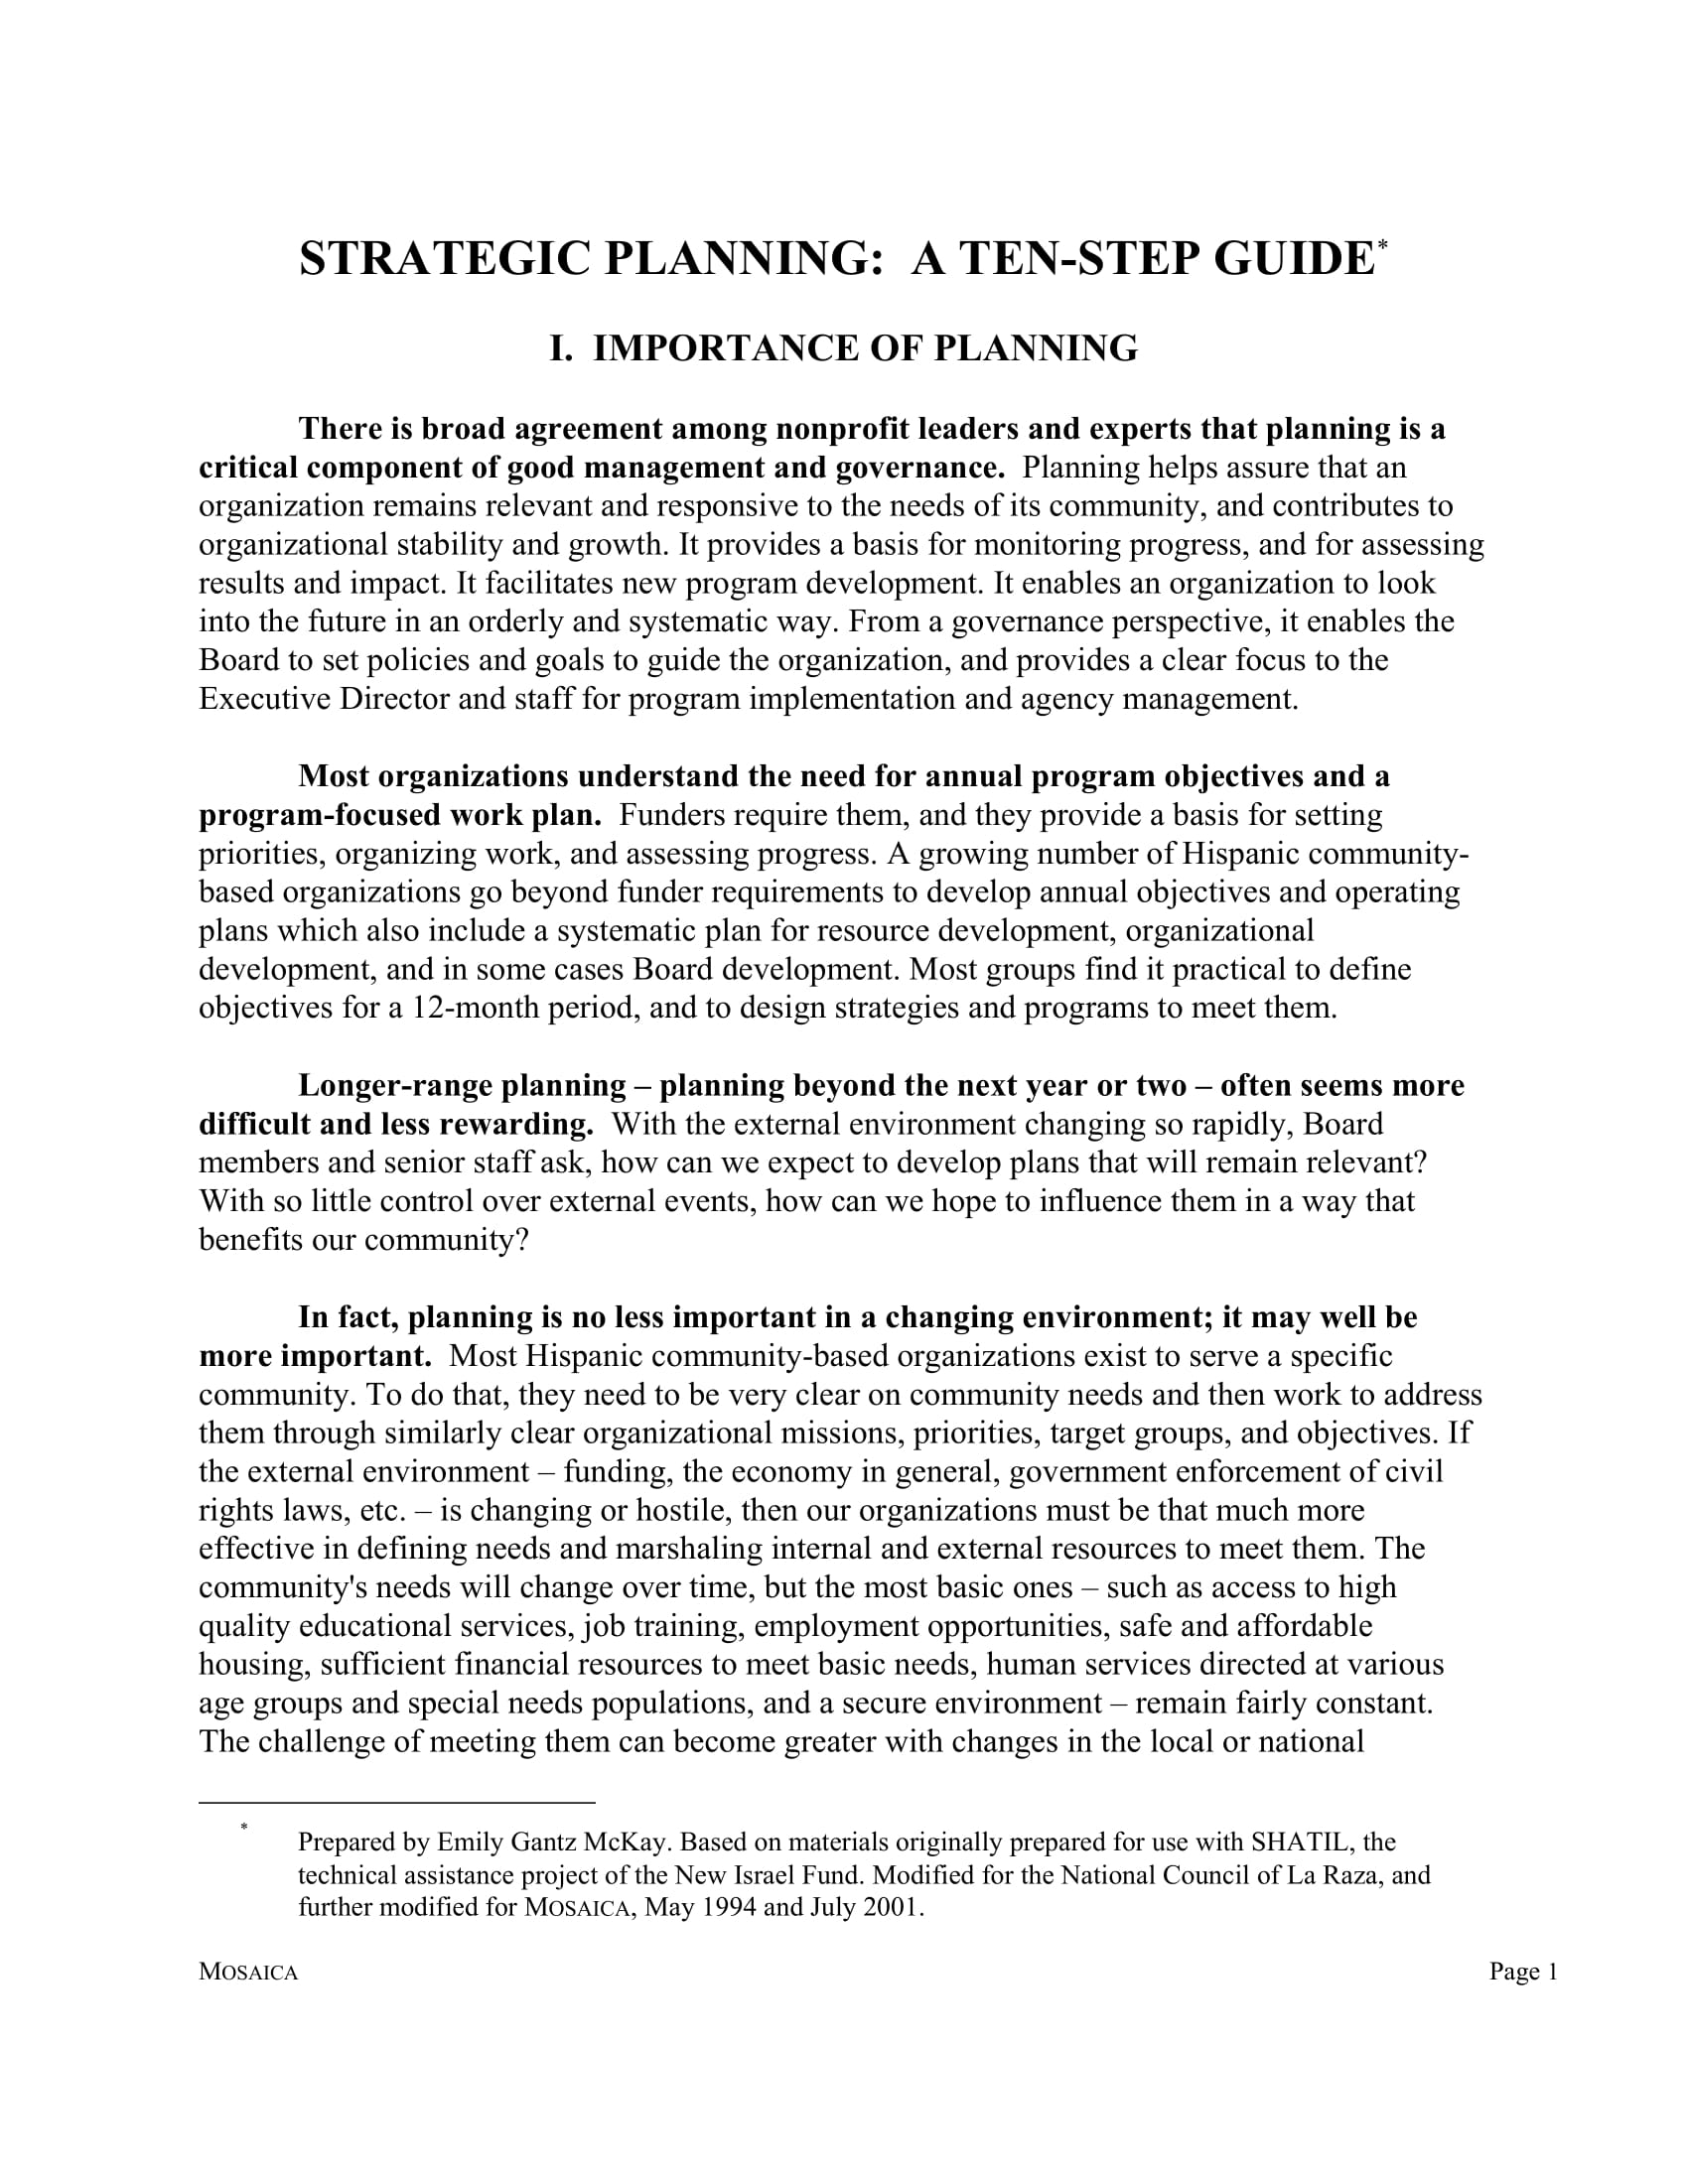 detailed strategic planning guide example 01